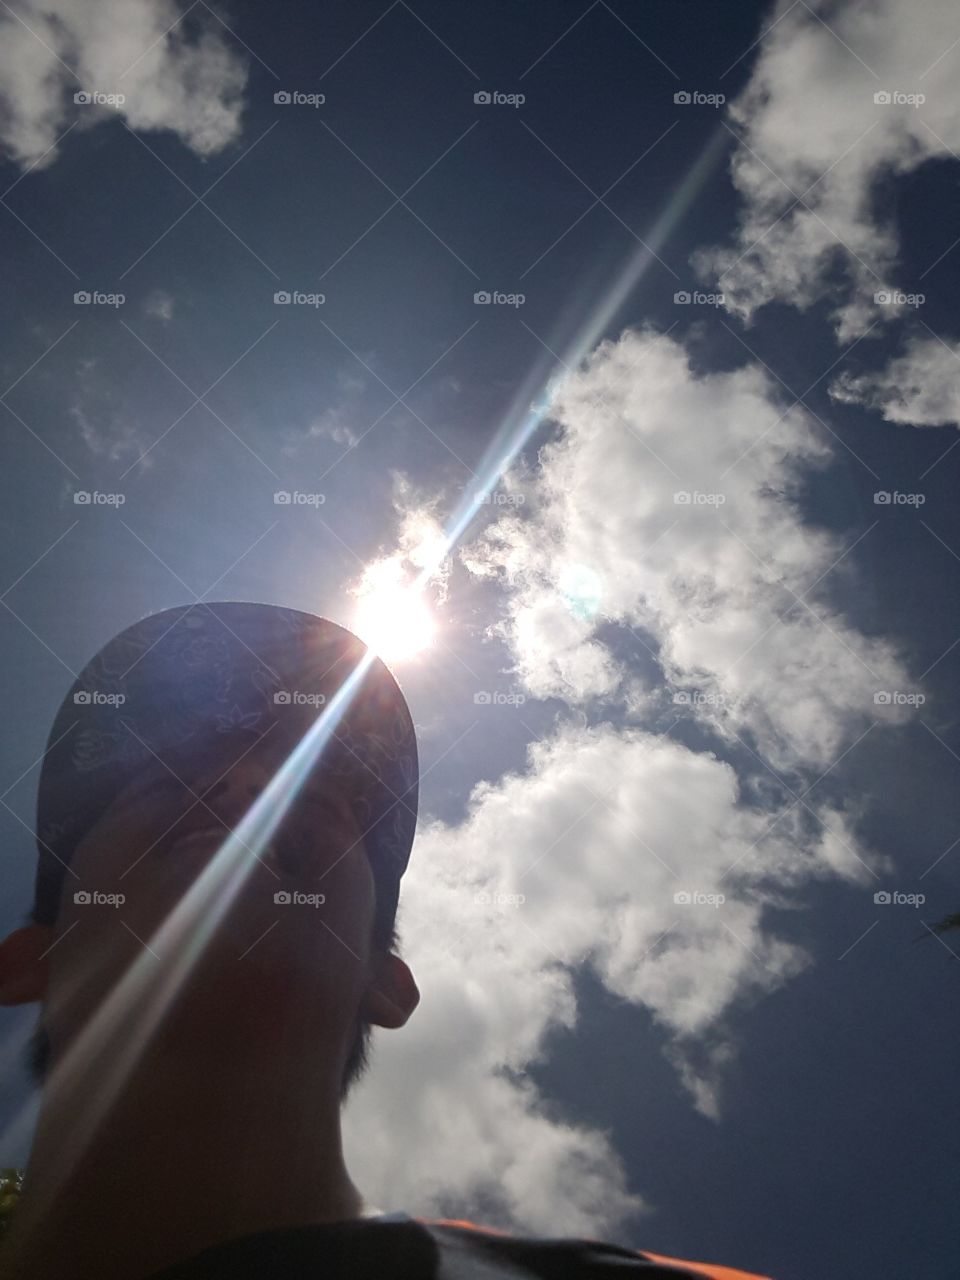 When you didn't notice your camera is on and accidentally captured you under the heat of the sun.